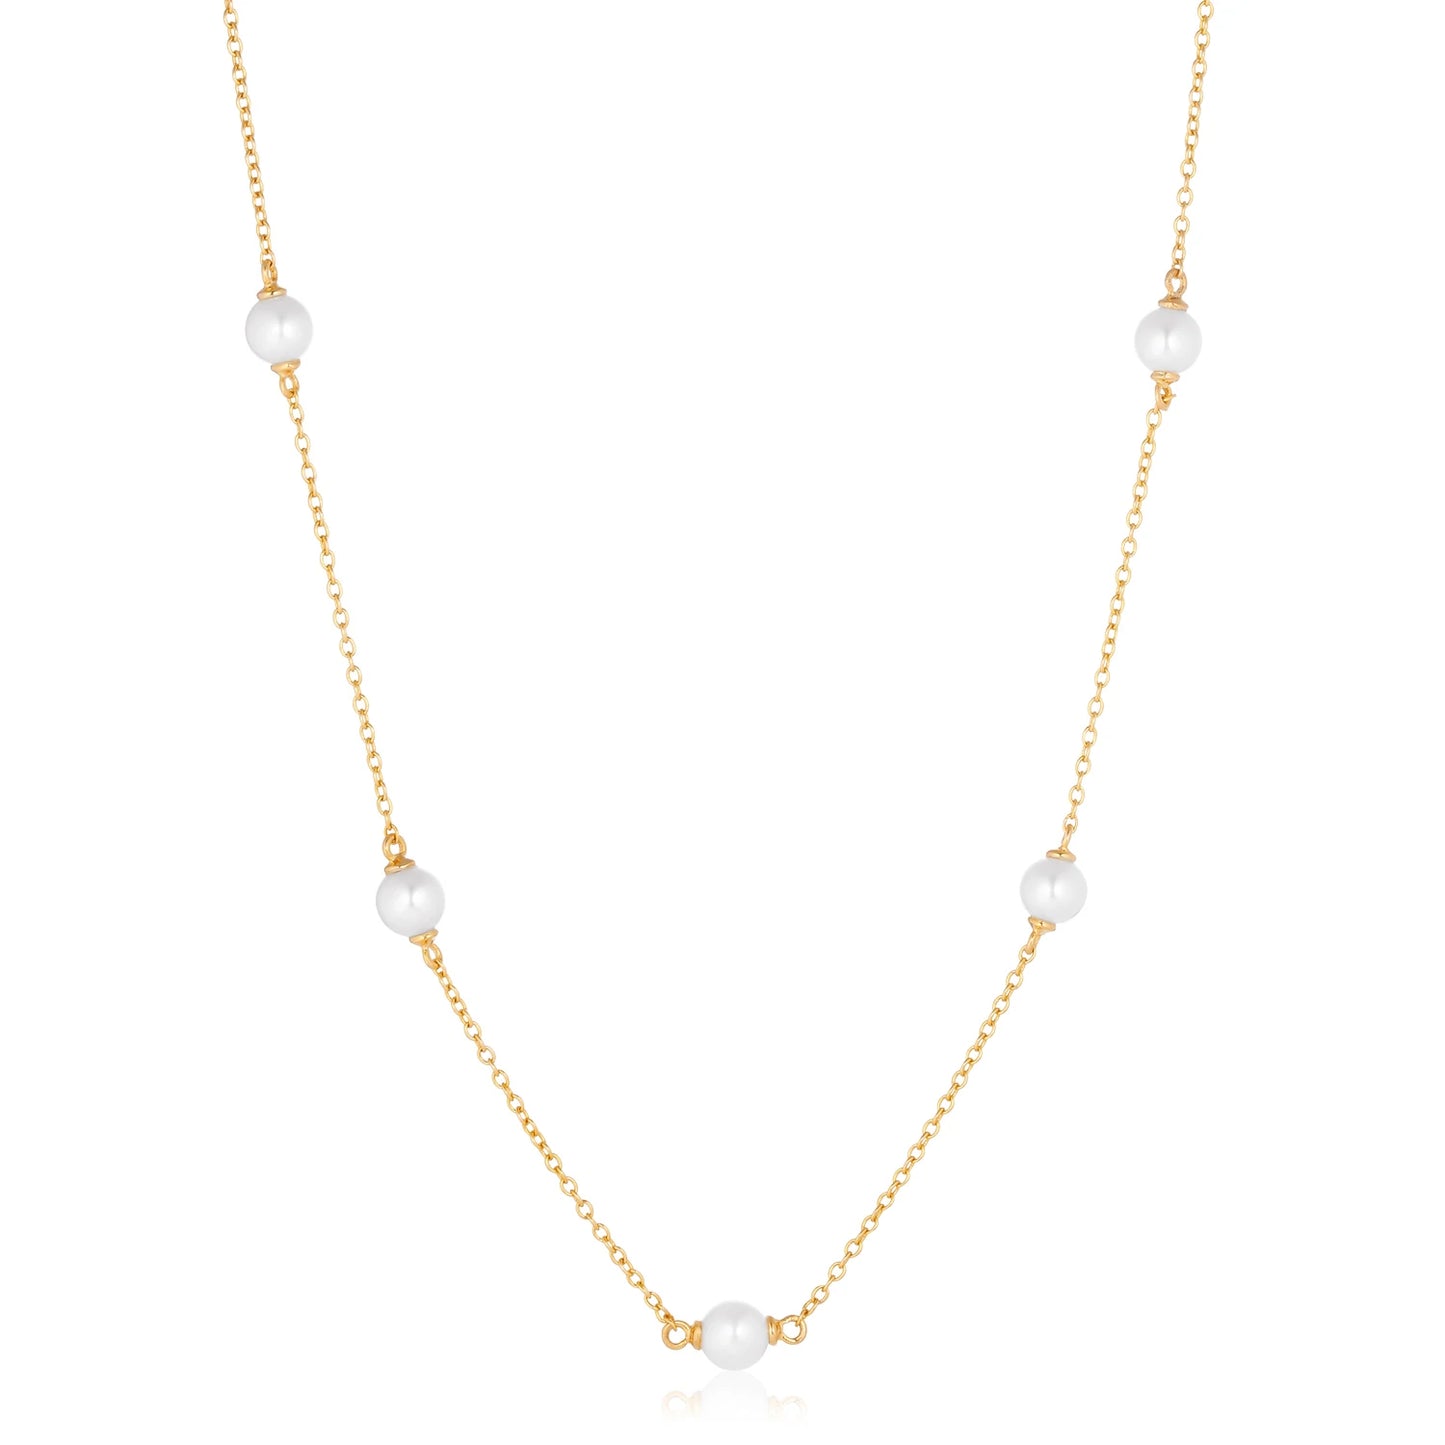 SIF JAKOBS NECKLACE PADUA CINQUE - 18K GOLD PLATED, WITH FRESHWATER PEARL AND WHITE ZIRKONIA